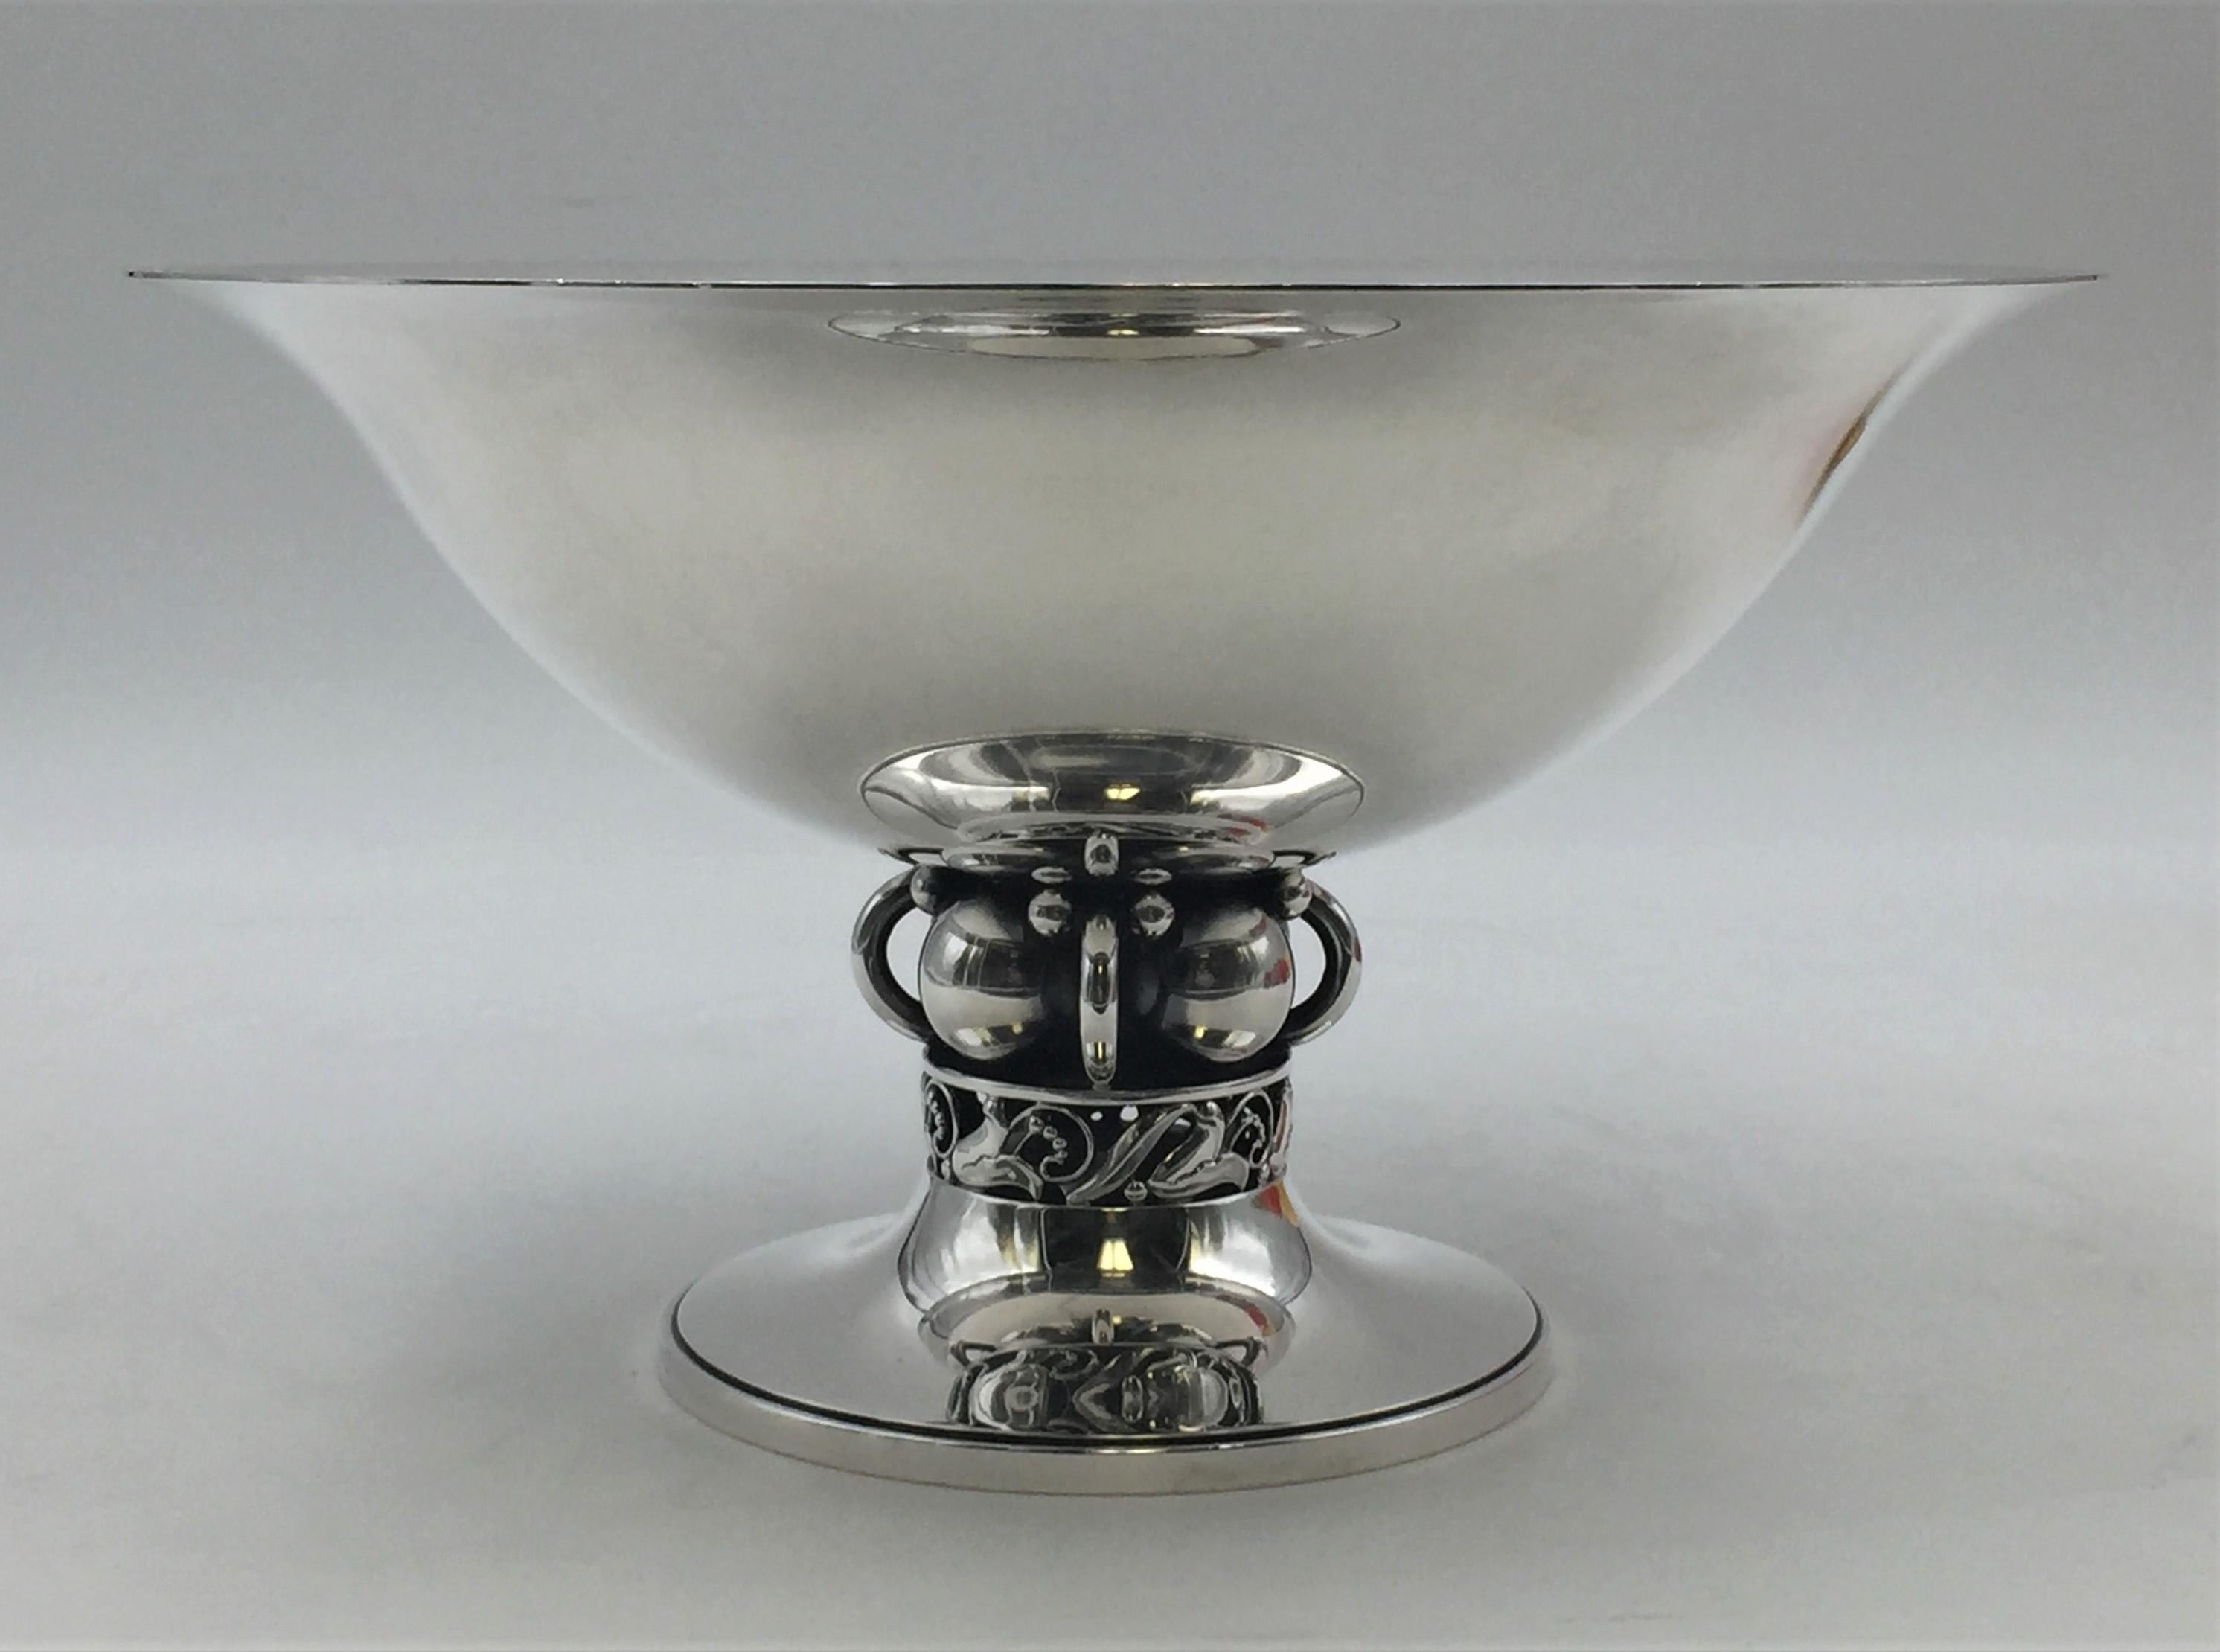 Sterling silver centerpiece bowl by International Sterling and designed by Alphonse La Paglia in mid-century modern Jensen style from 1952 with exquisite floral and geometric-shaped designs. It measures 10'' in diameter by 5 3/4'' in height and